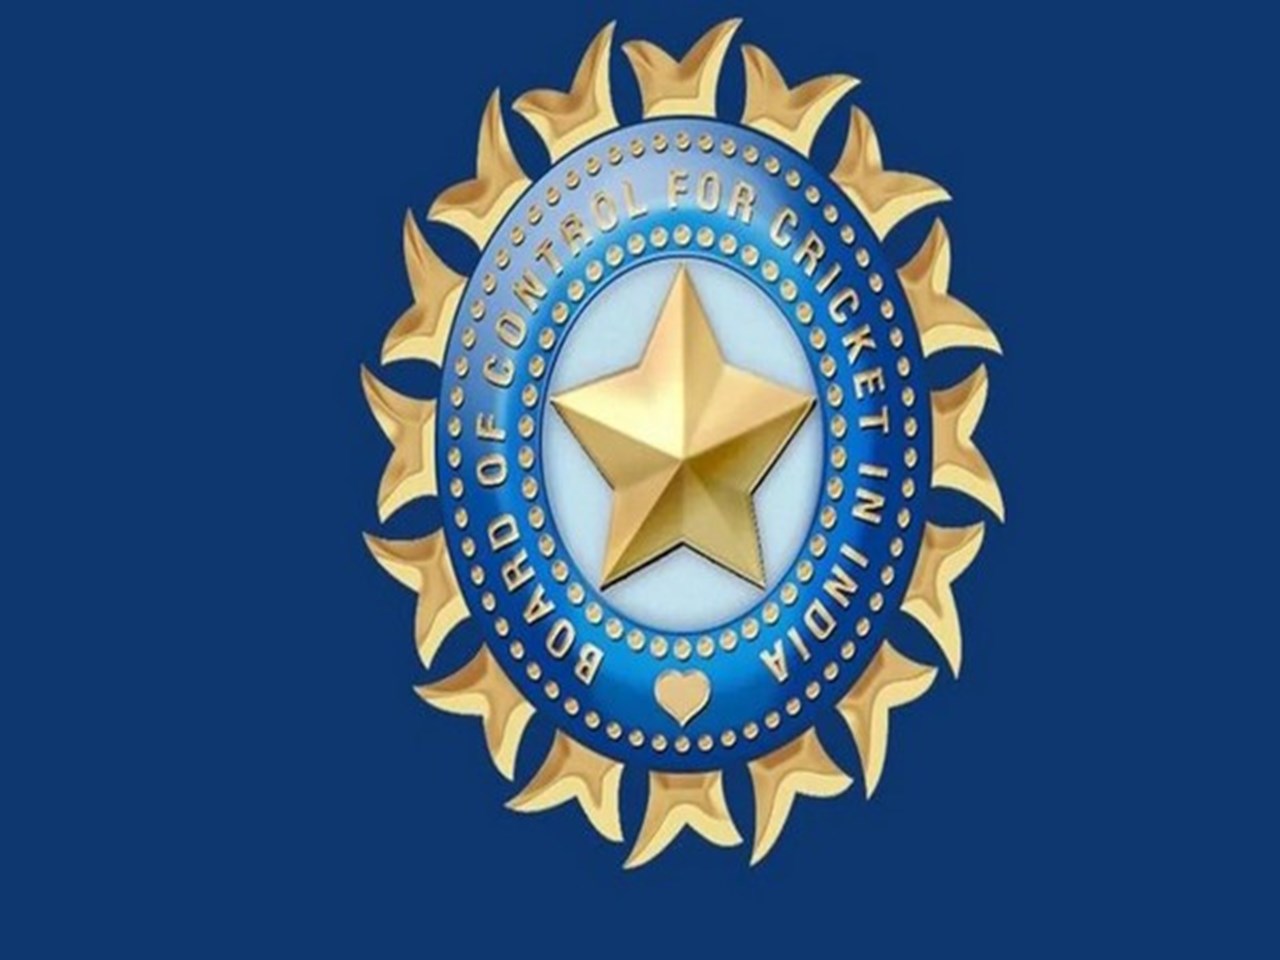 Adidas and BCCI Reveal The All-New Indian Cricket Team Jerseys